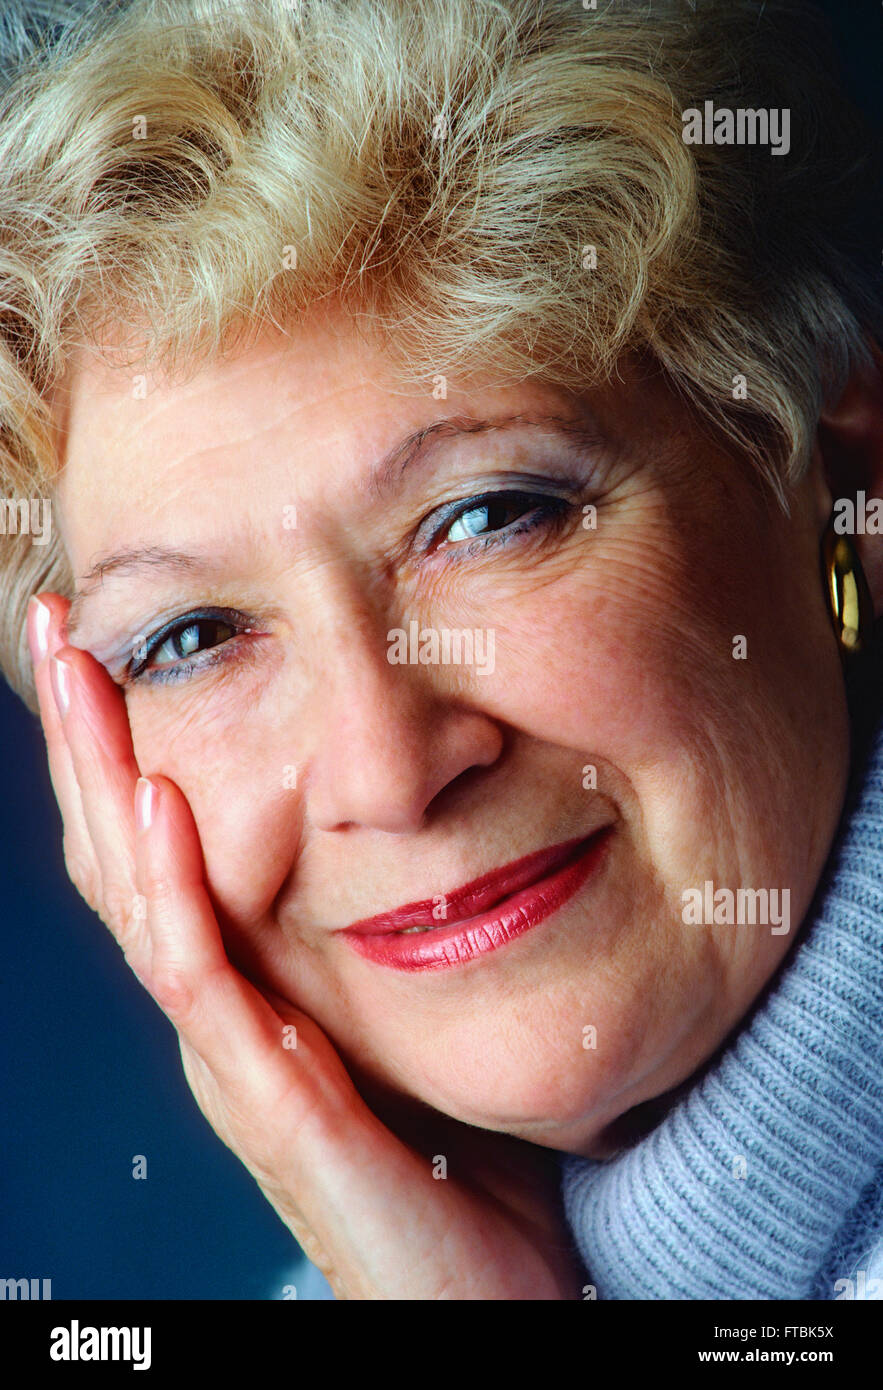 Close-up portrait of attractive middle aged woman Stock Photo